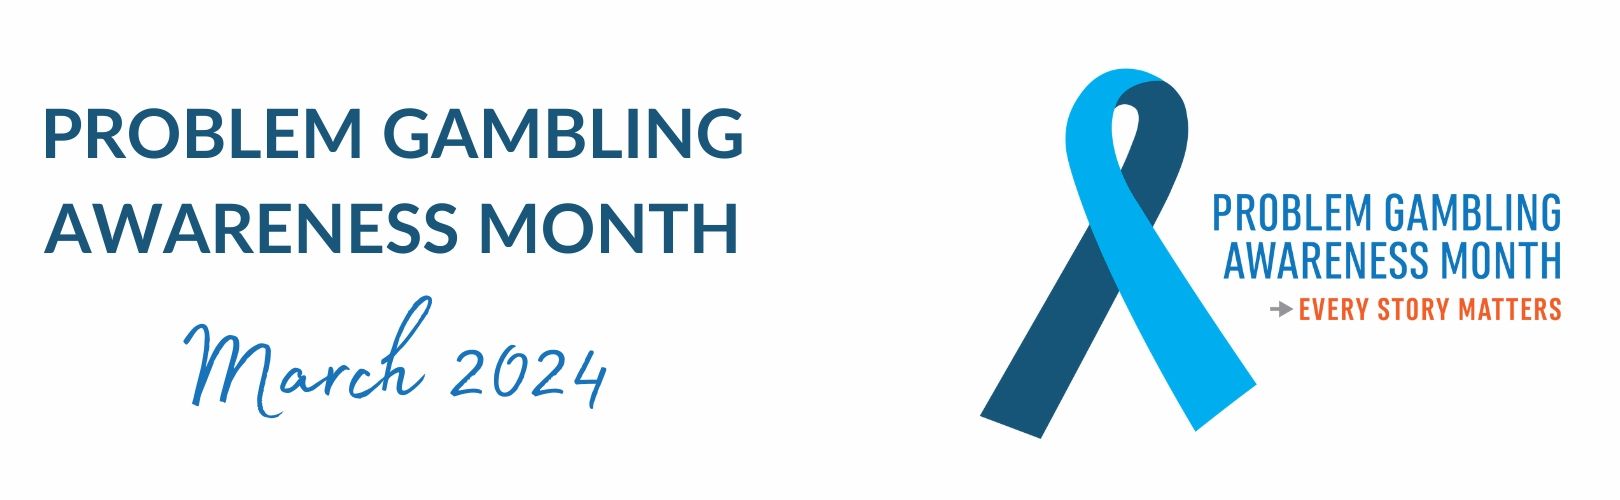 problem gambling awareness month blue ribbon with the text 